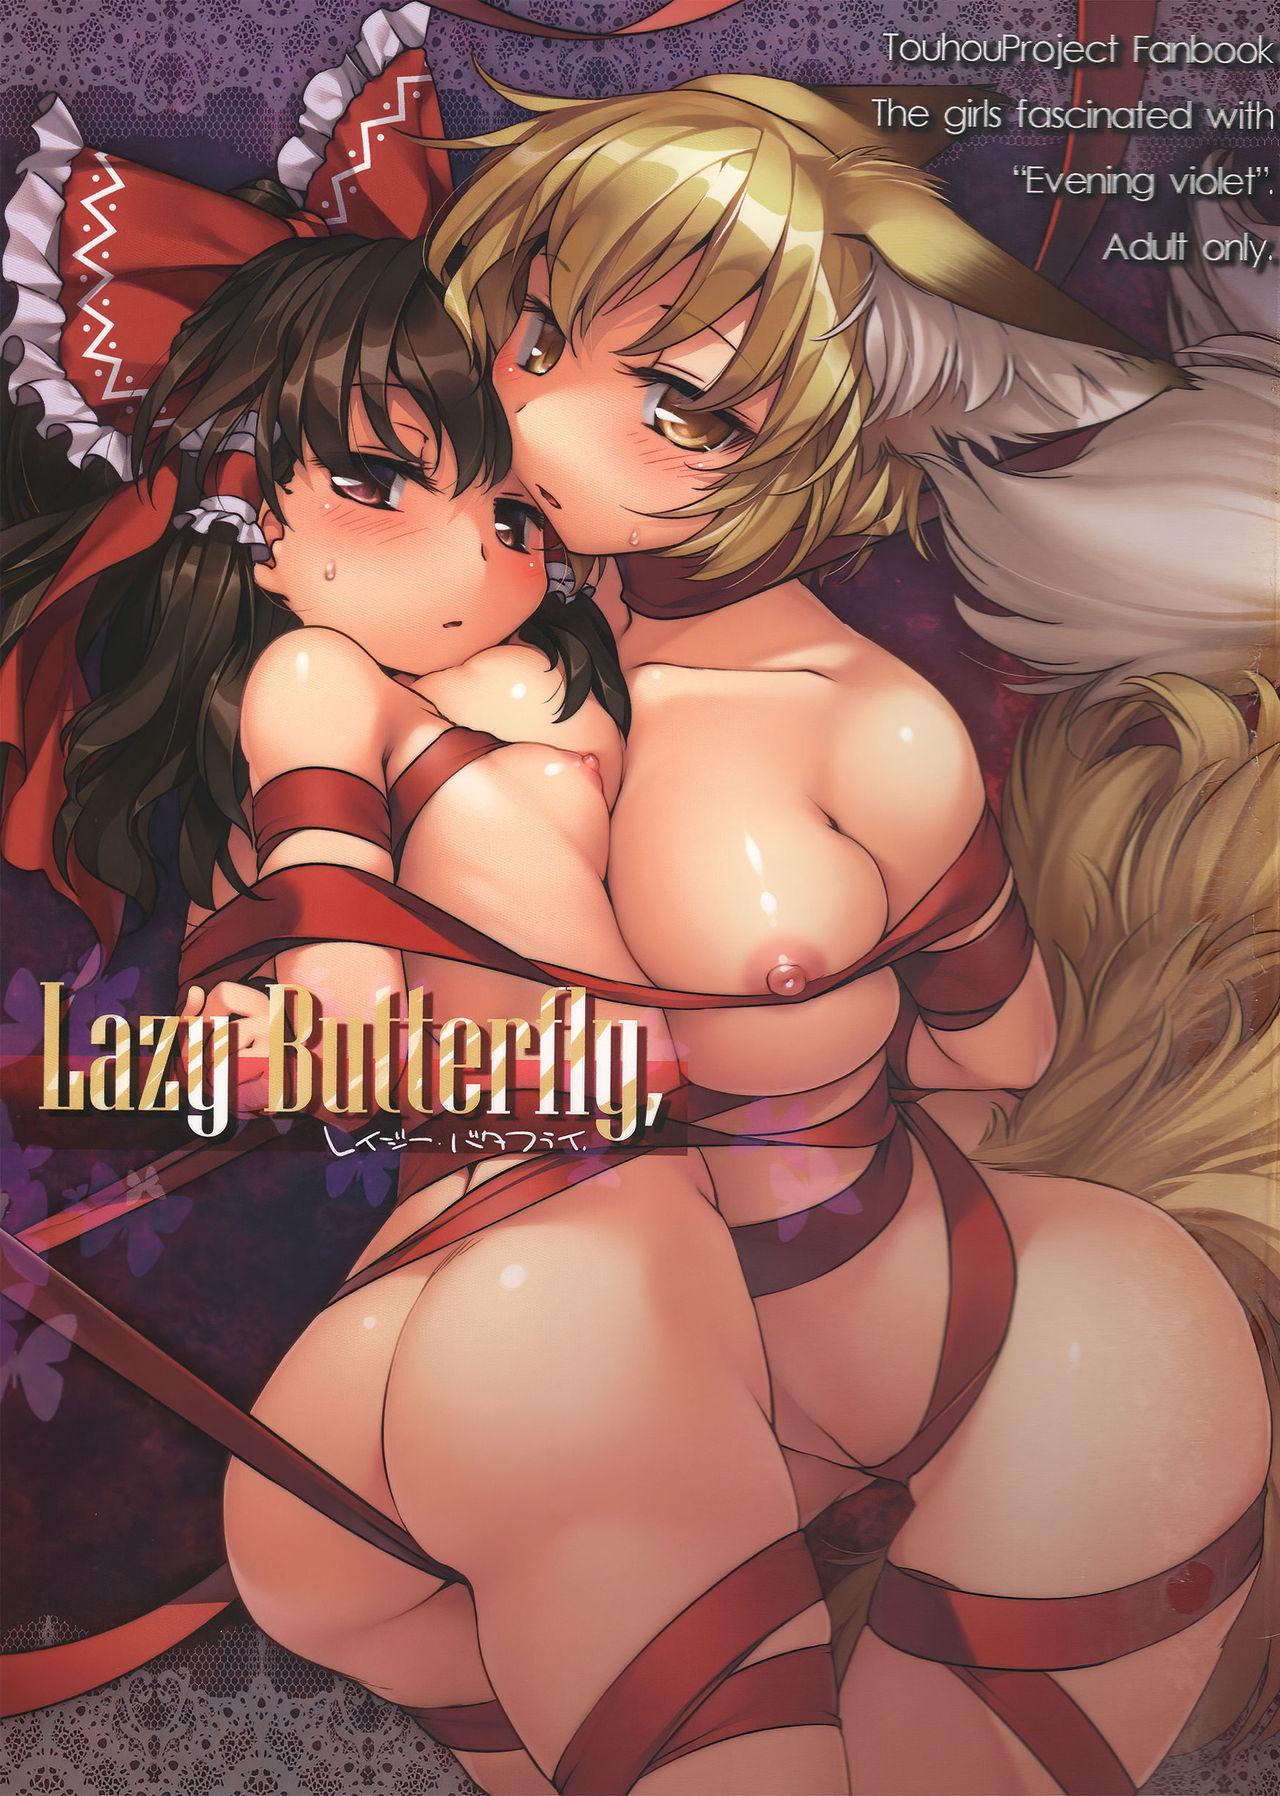 Titties Lazy Butterfly - Touhou project Hot Blow Jobs - Page 1